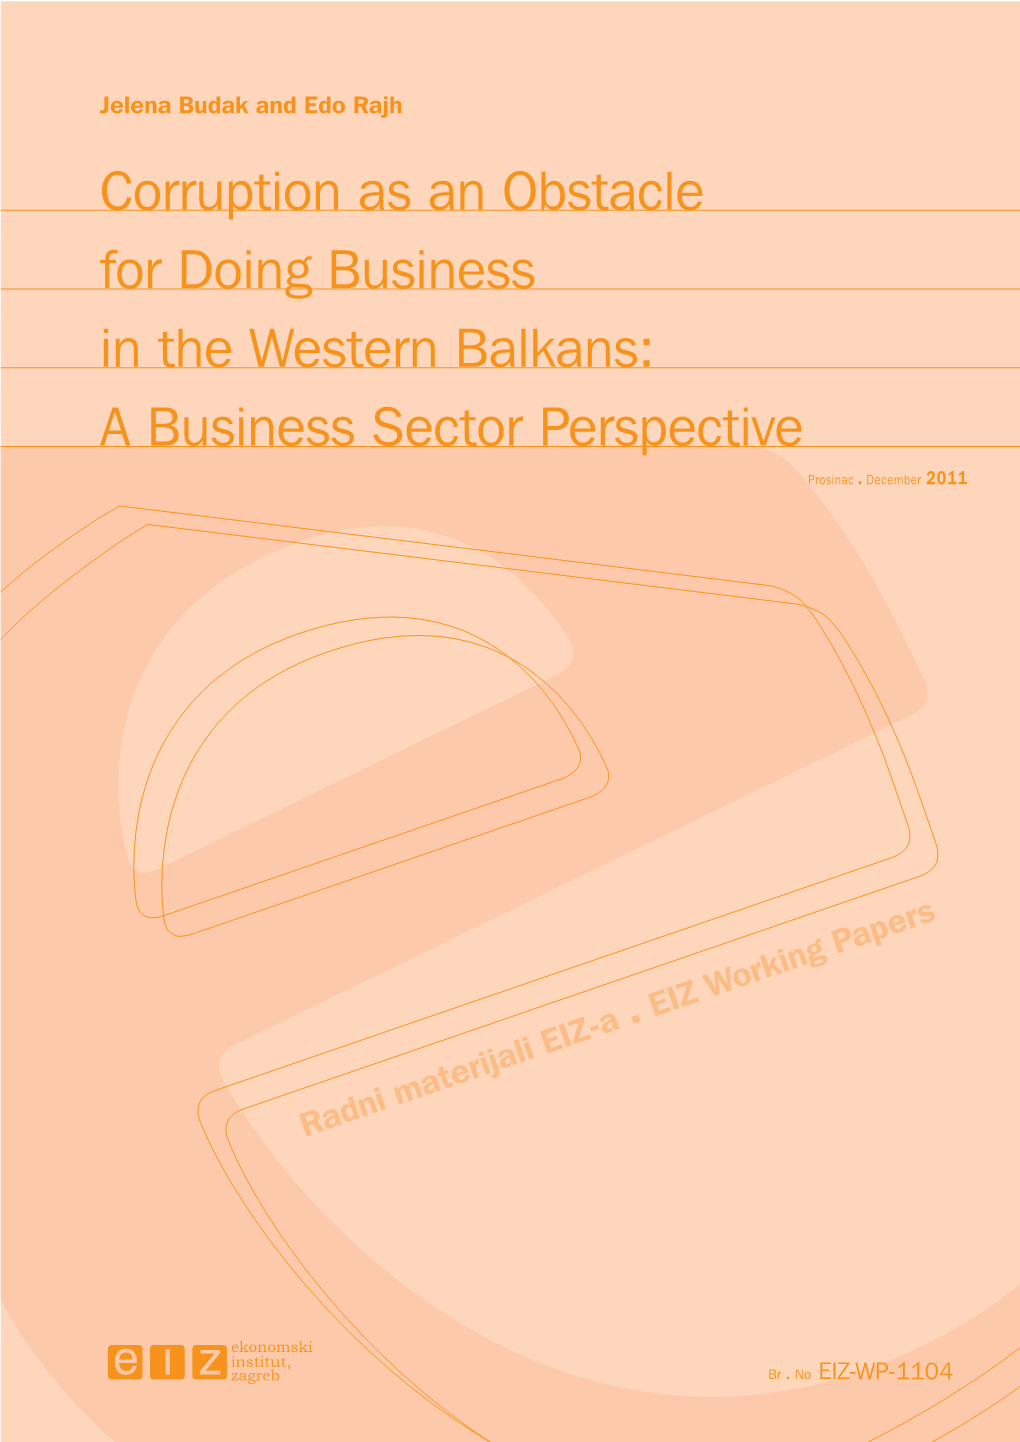 Corruption As an Obstacle for Doing Business in the Western Balkans: a Business Sector Perspective